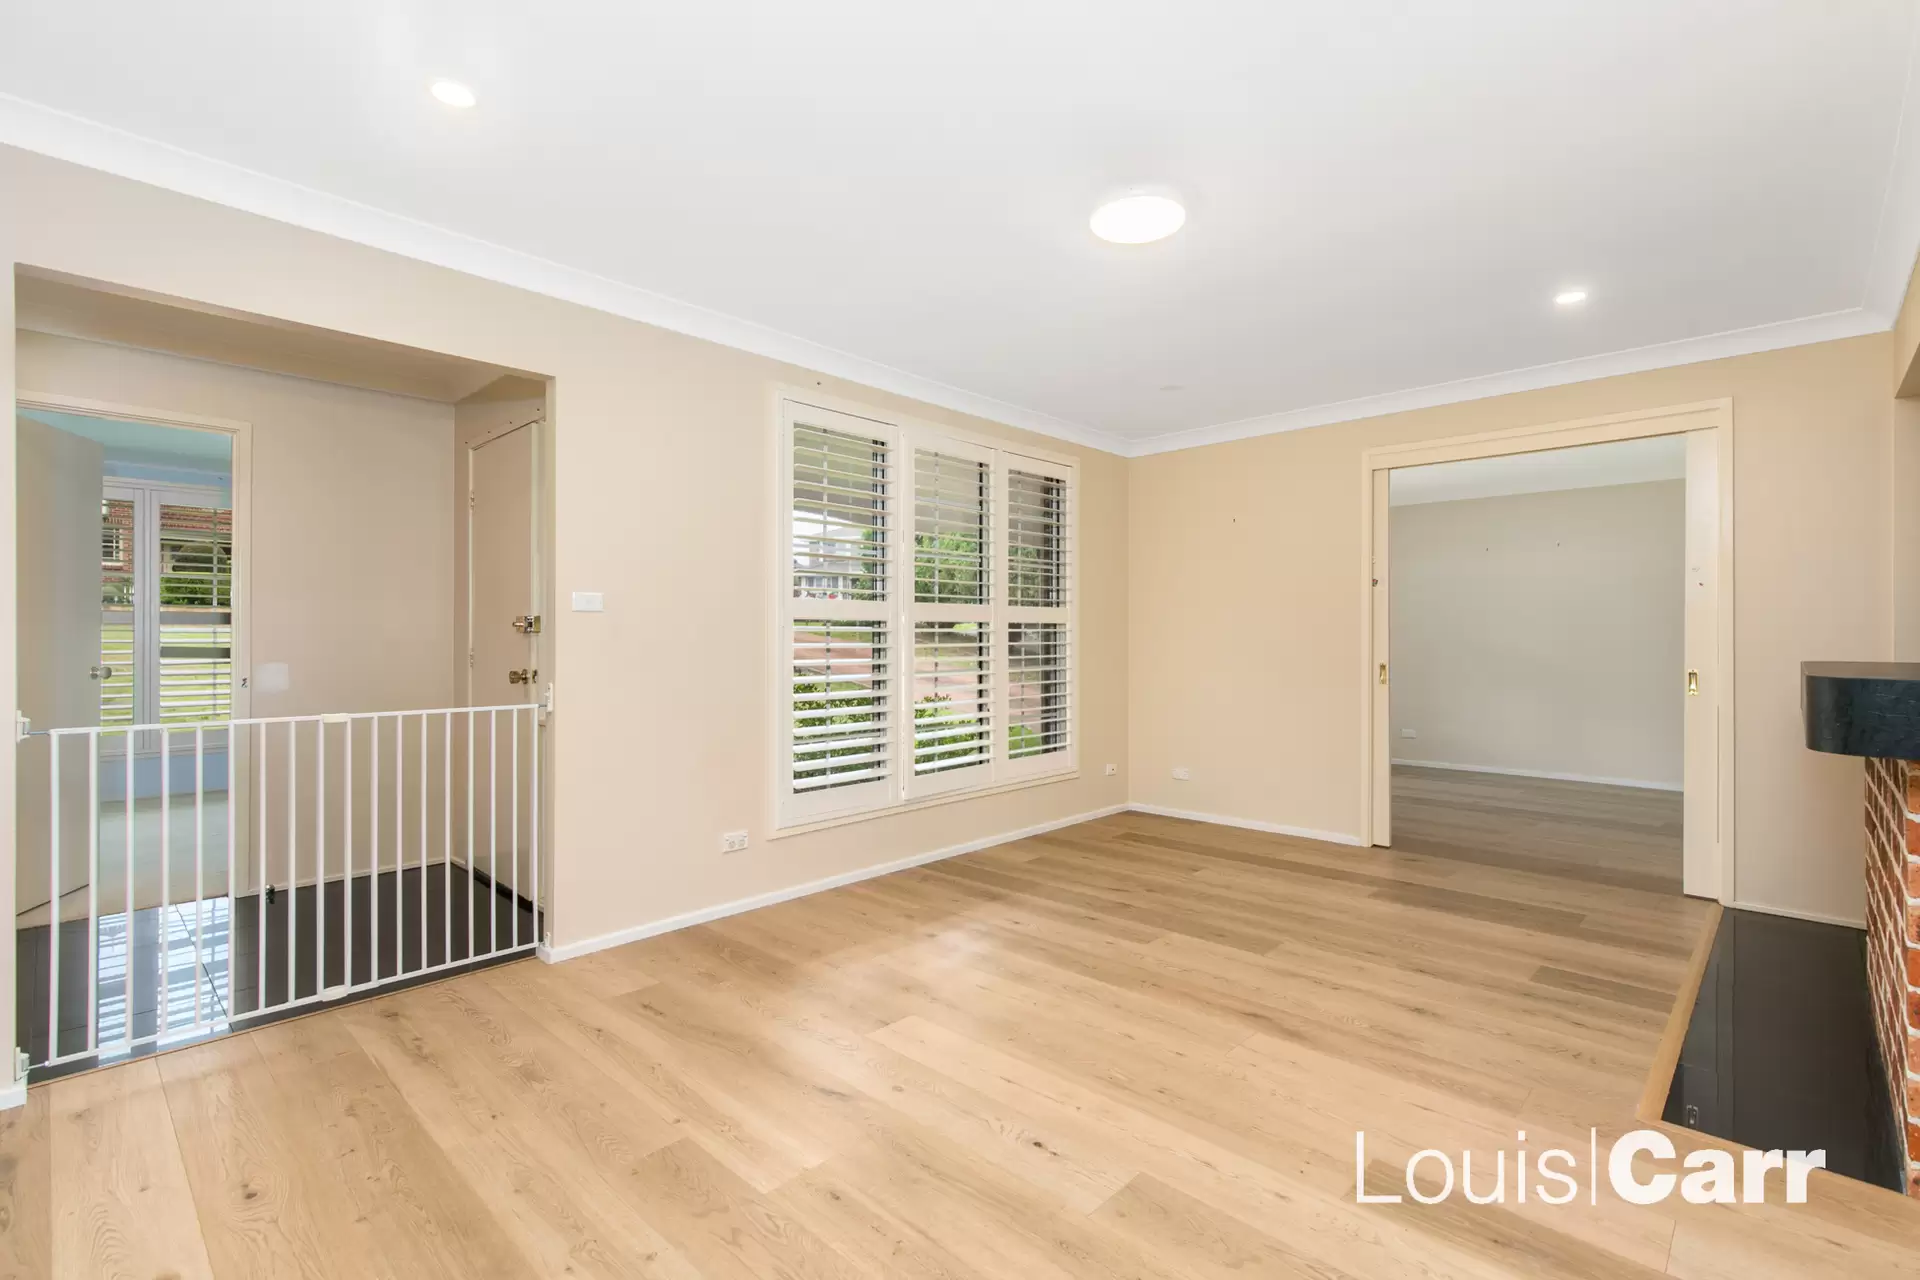 Photo #4: 14 Ridgewood Place, Dural - Leased by Louis Carr Real Estate